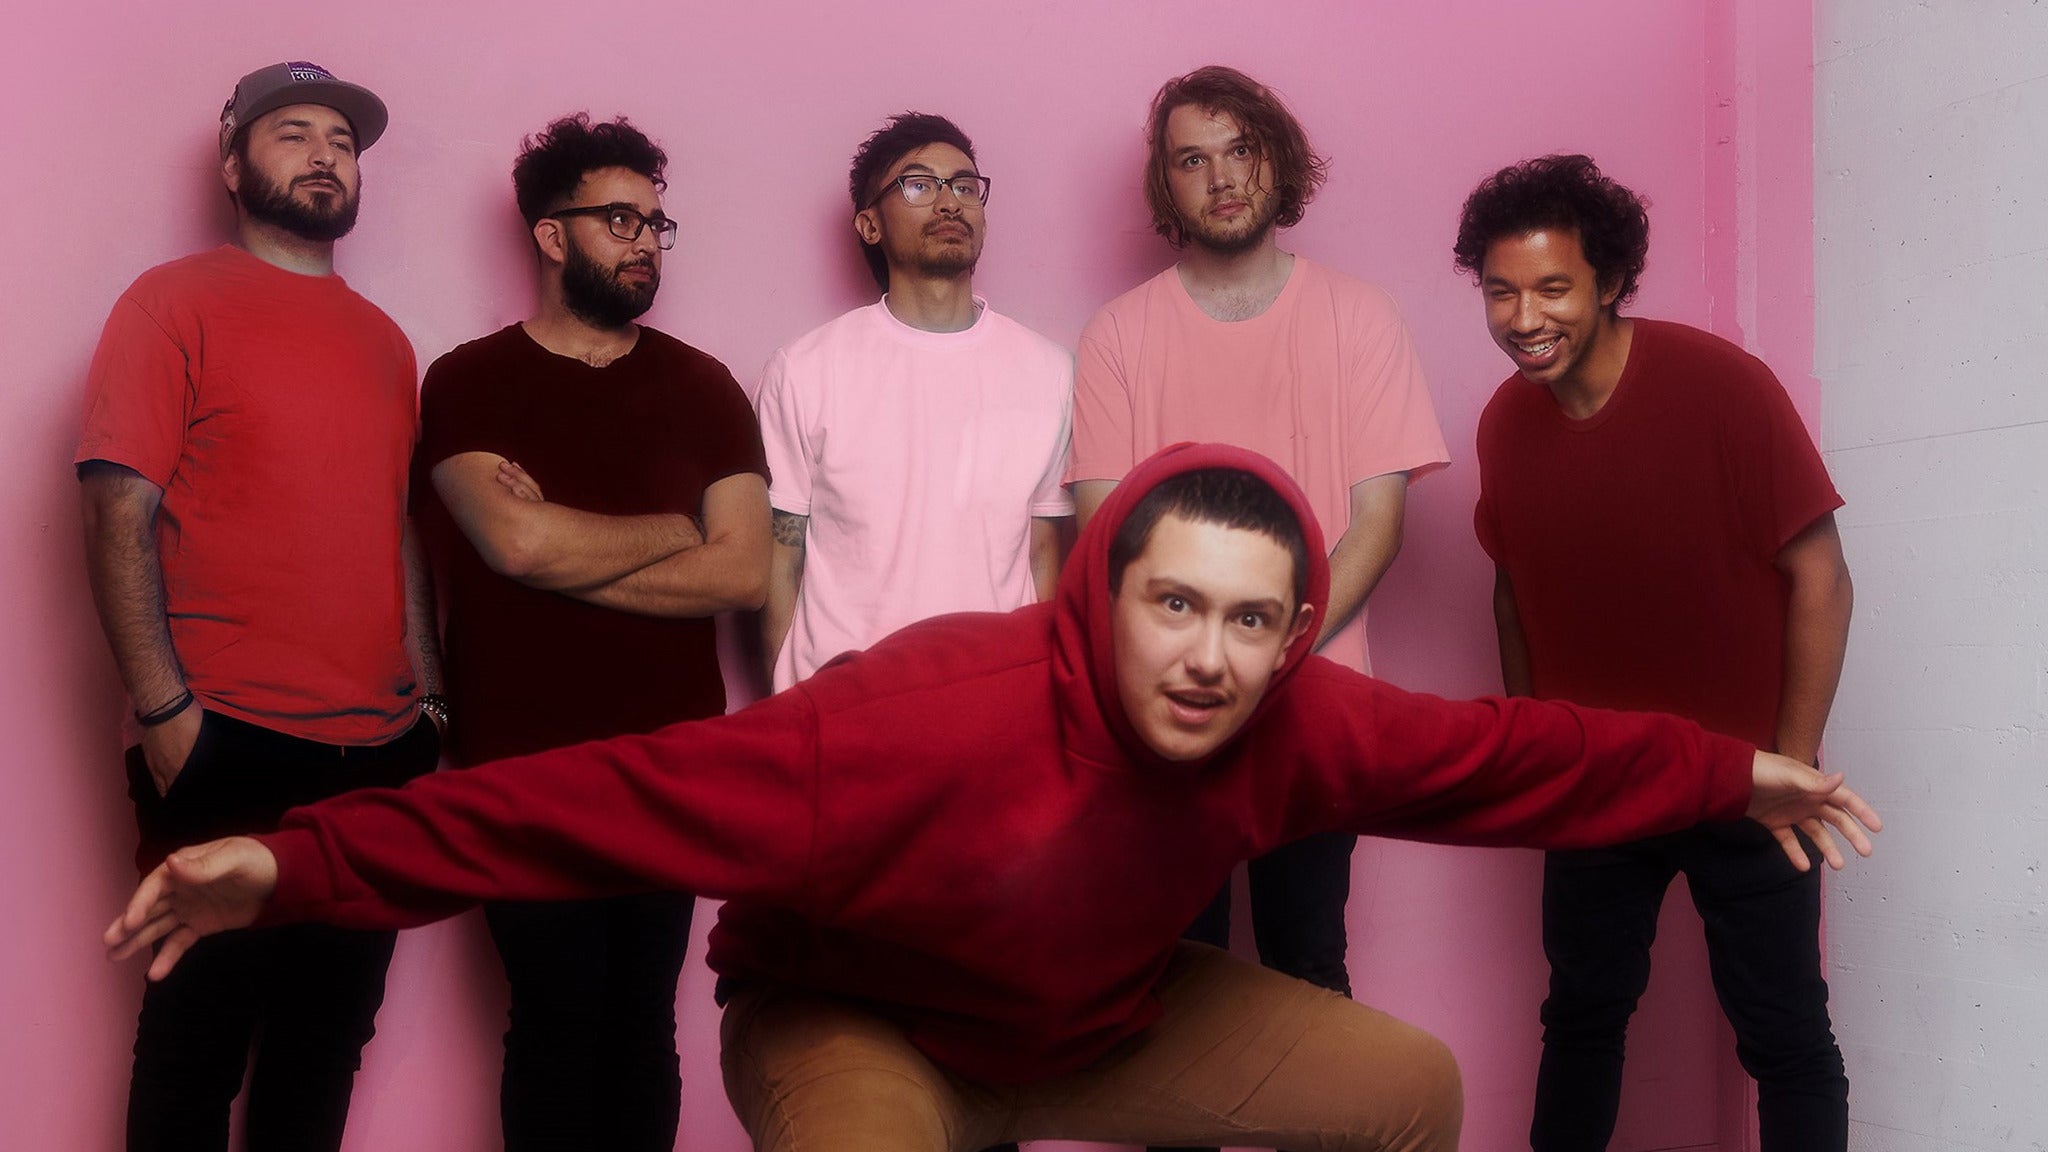 The Fall Tour of Hobo Johnson & the Lovemakers in Charlotte promo photo for Live Nation presale offer code